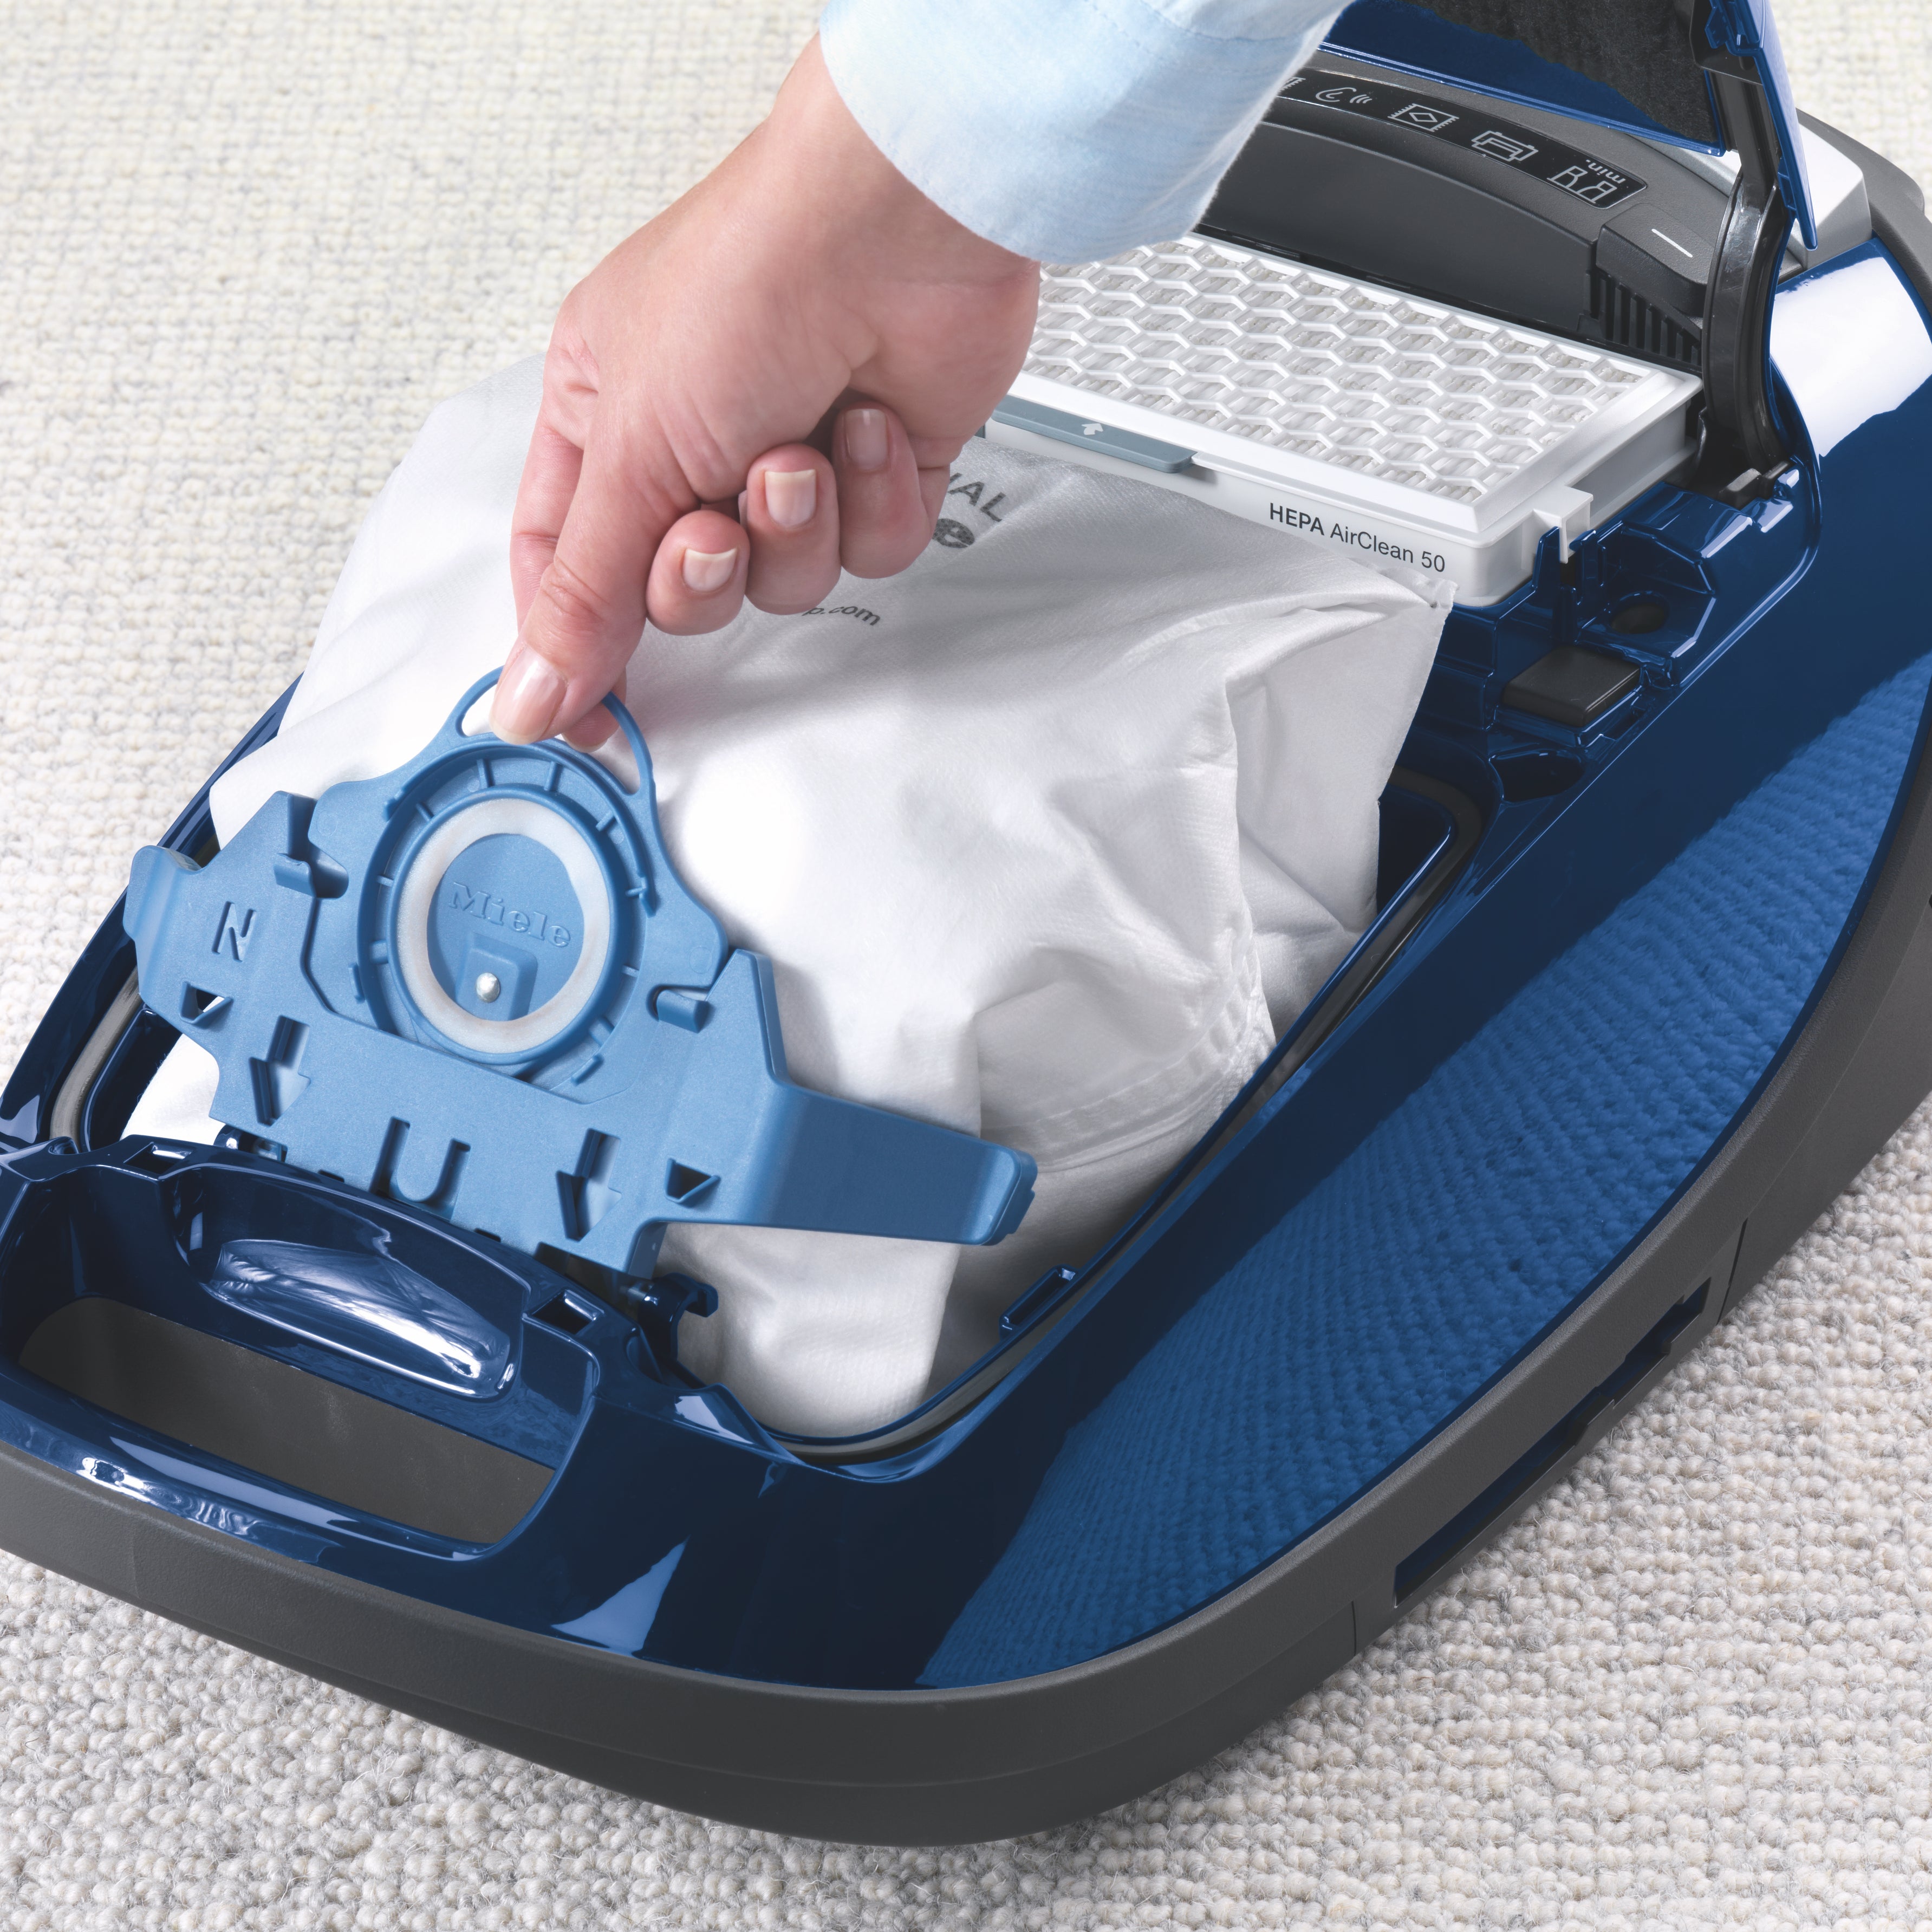 Vacuum Bags & Filters for Allergy Concerns